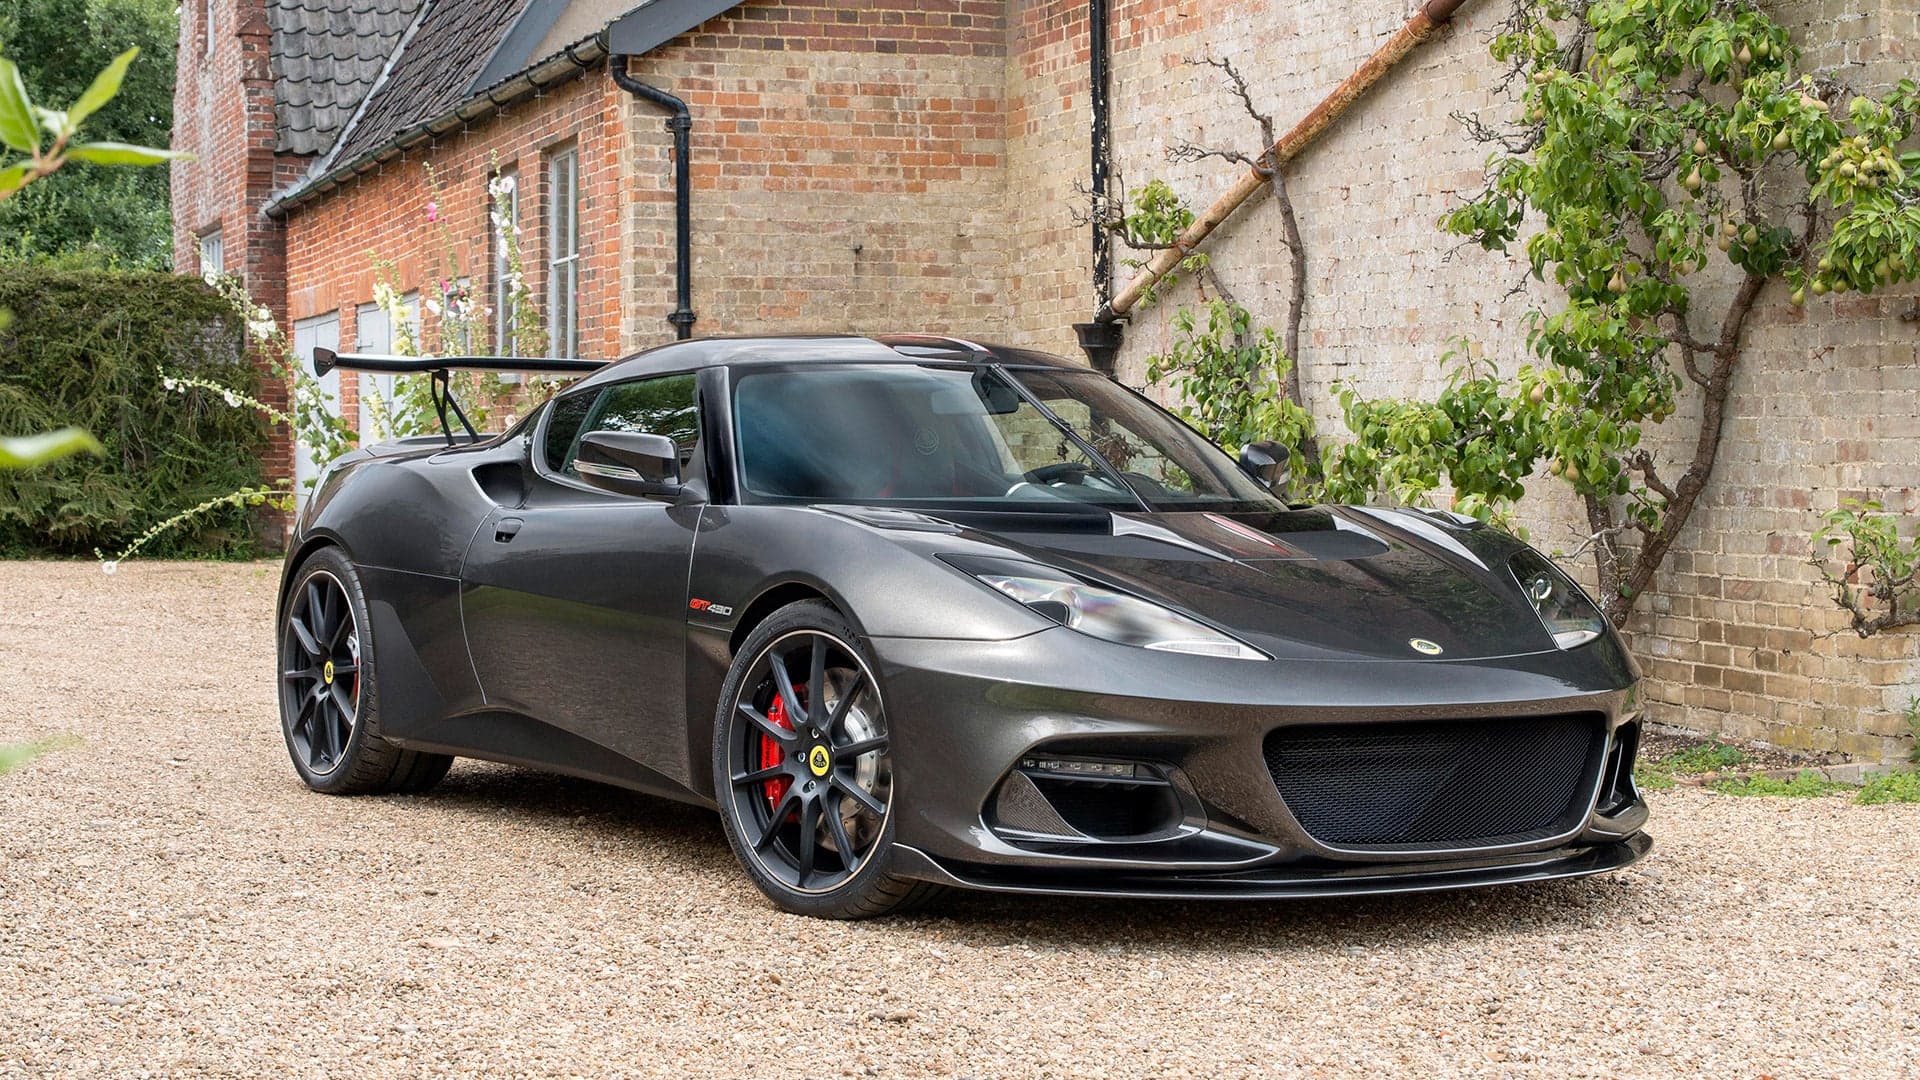 Lotus Unveils the Evora GT430, Its Most Powerful Road Car Ever